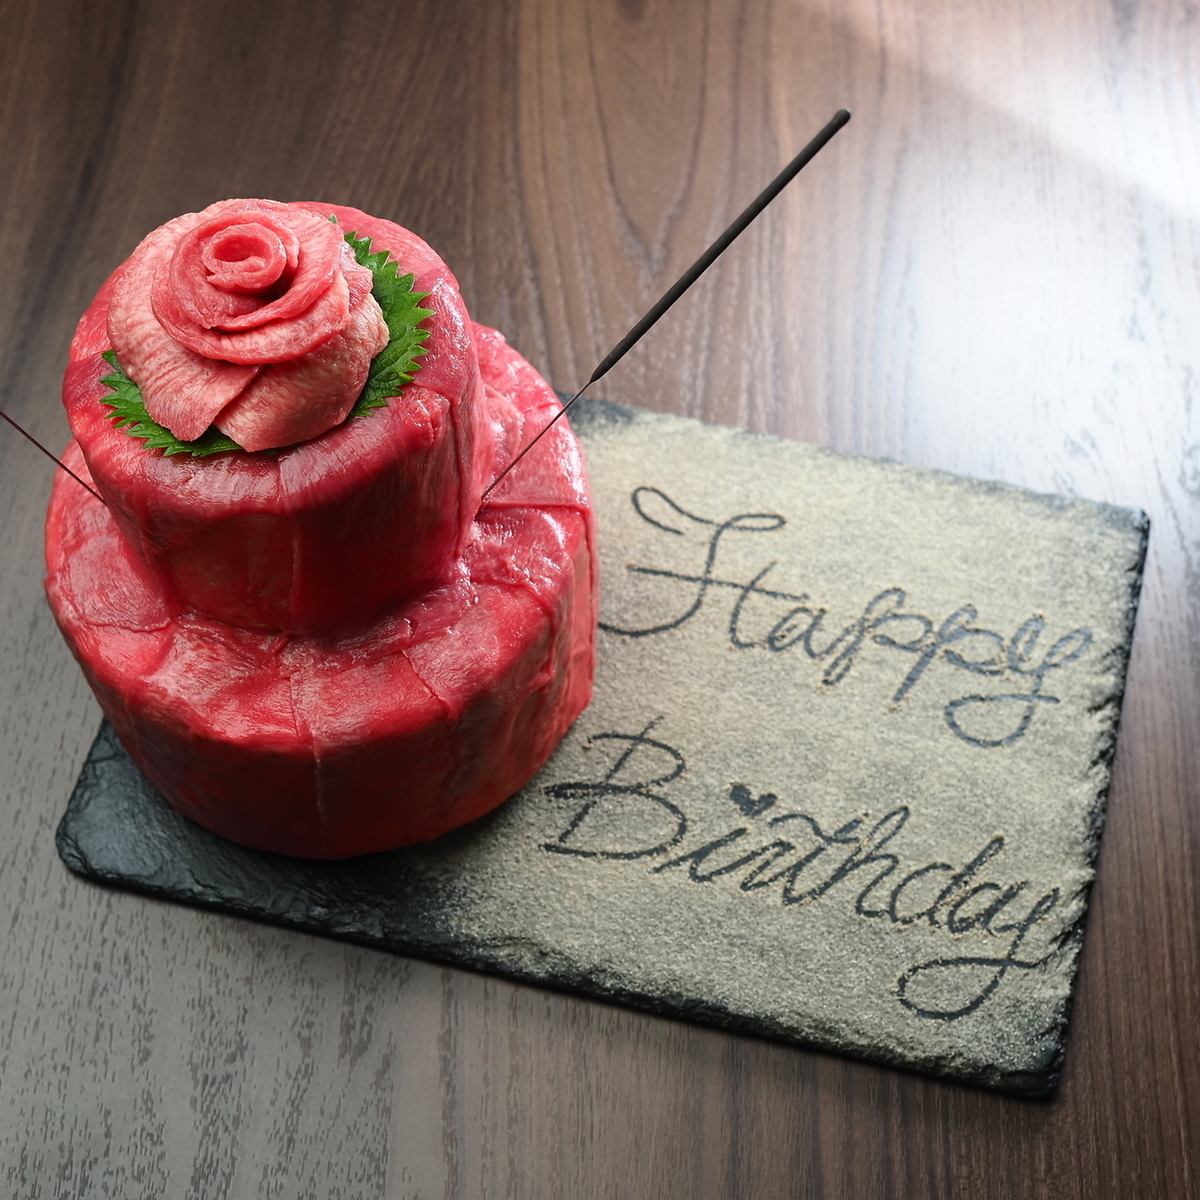 Meat cakes for anniversaries! Create a special day.